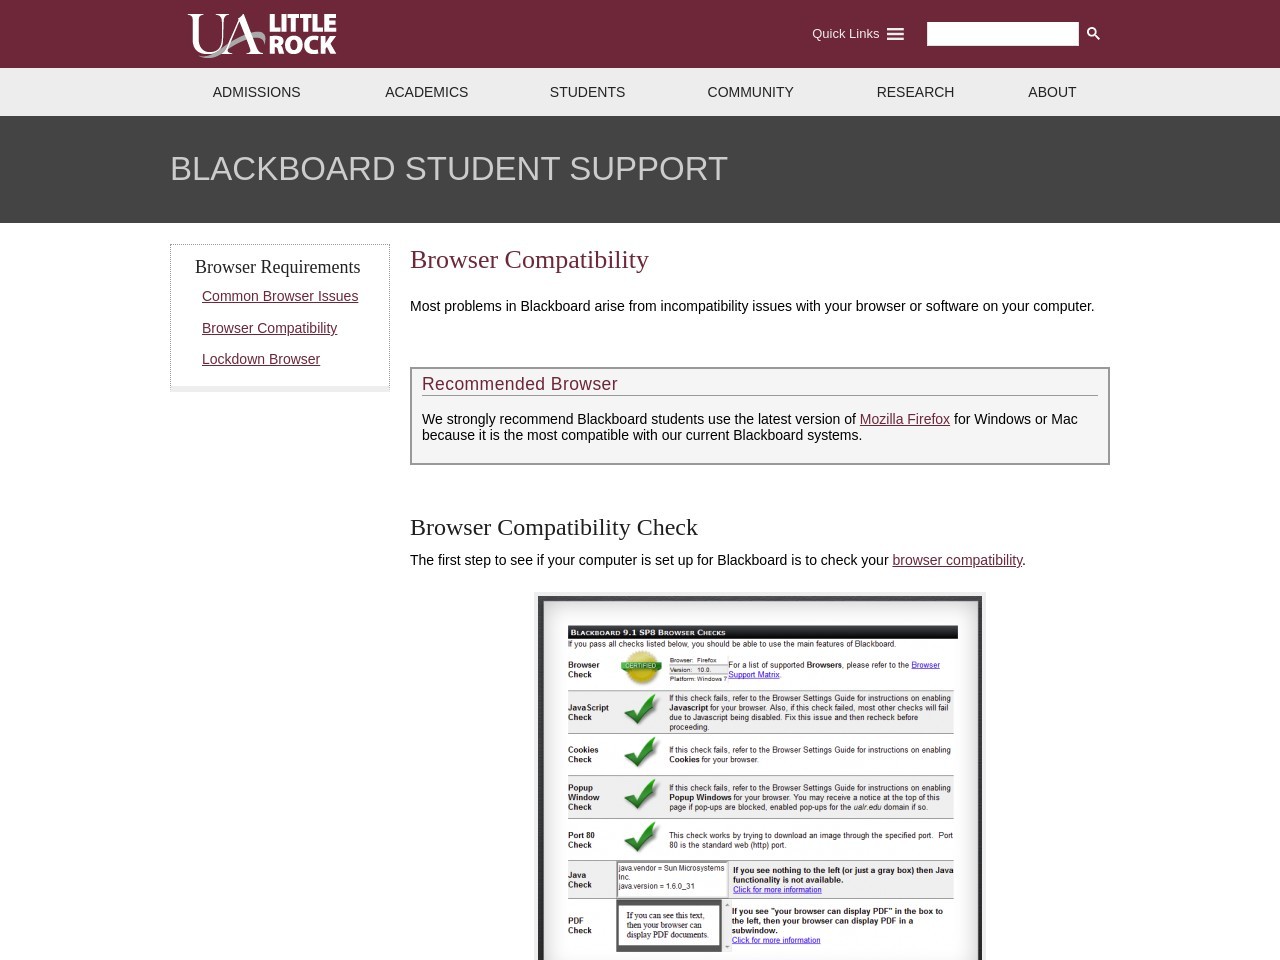 Browser Compatibility - Blackboard Student Support